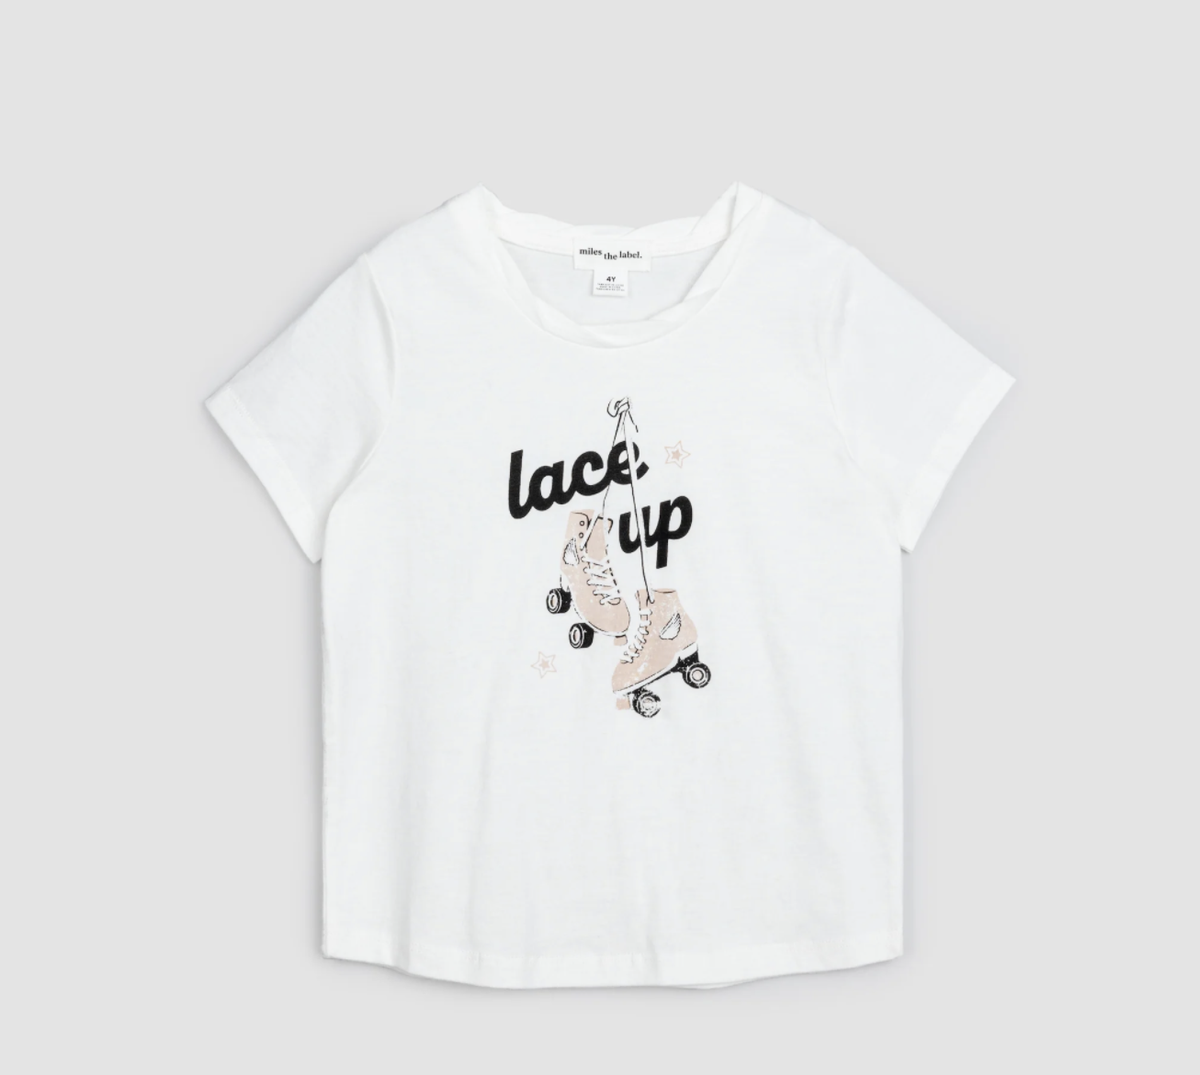 MILES THE LABEL: "LACE UP" OFF-WHITE GIRLS T-SHIRT